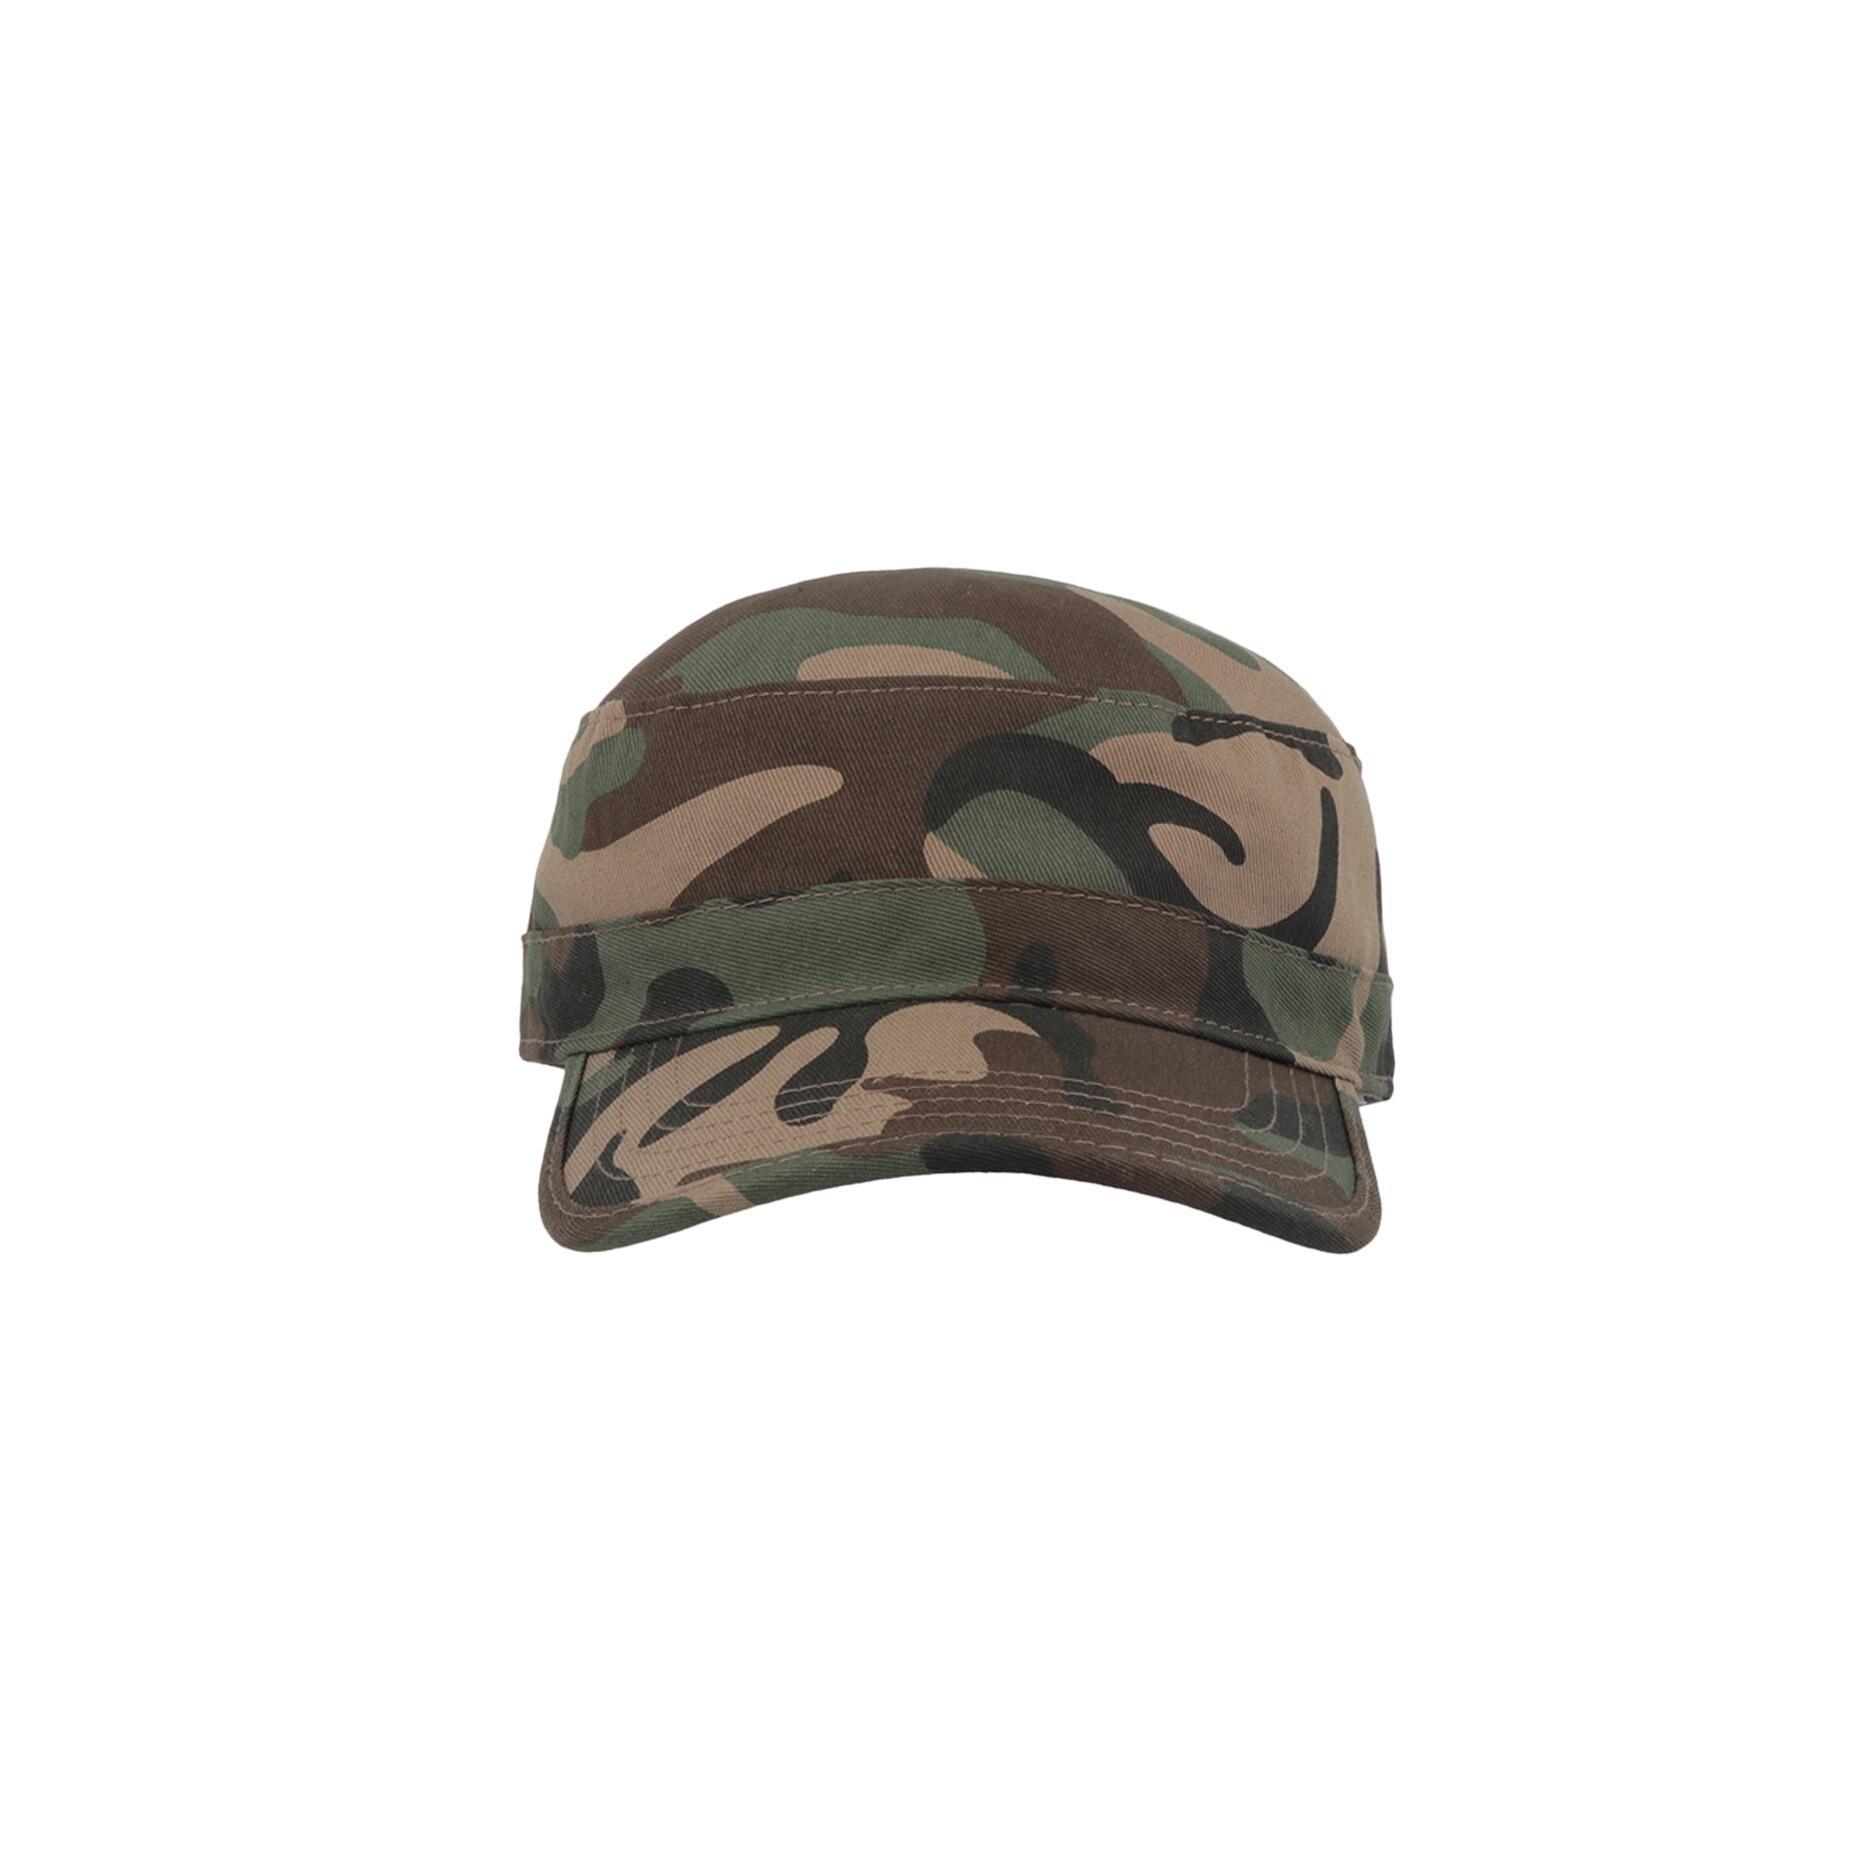 Tank Brushed Cotton Military Cap (Camouflage) 5/5